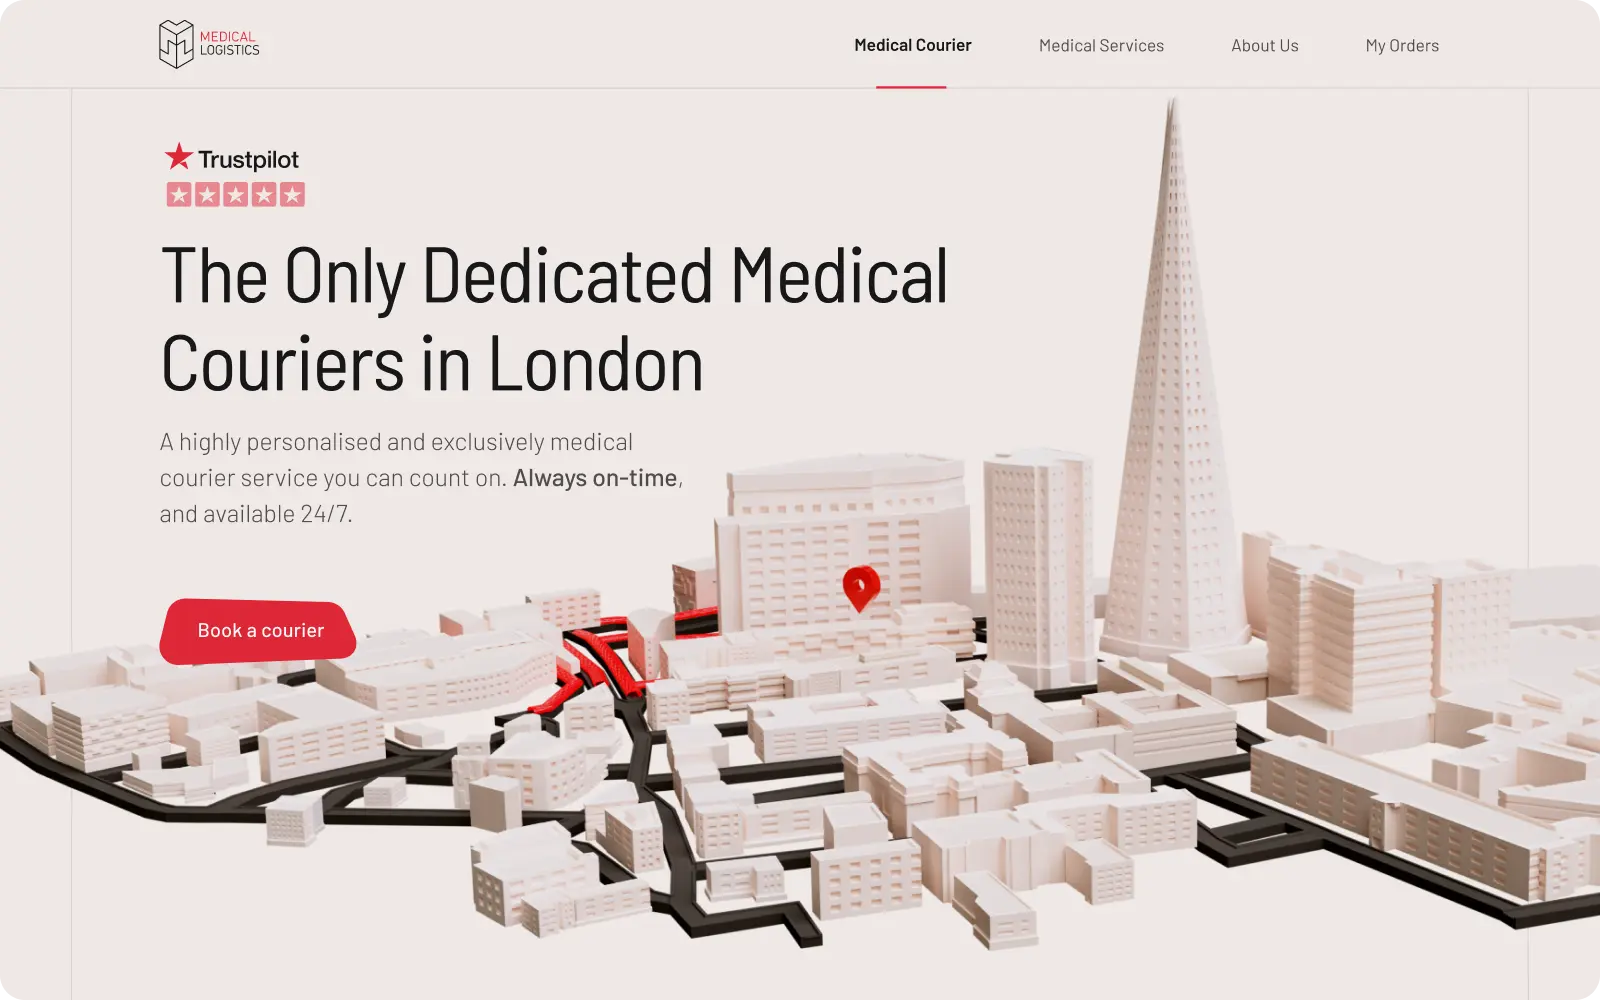 Website design for Medical Courier services. Large, dark headline 'The Only Dedicated Medical Couriers in London. In the background, a 3D model of the city of London with red streets where blood is distributed. Bright cream colors with a red accent